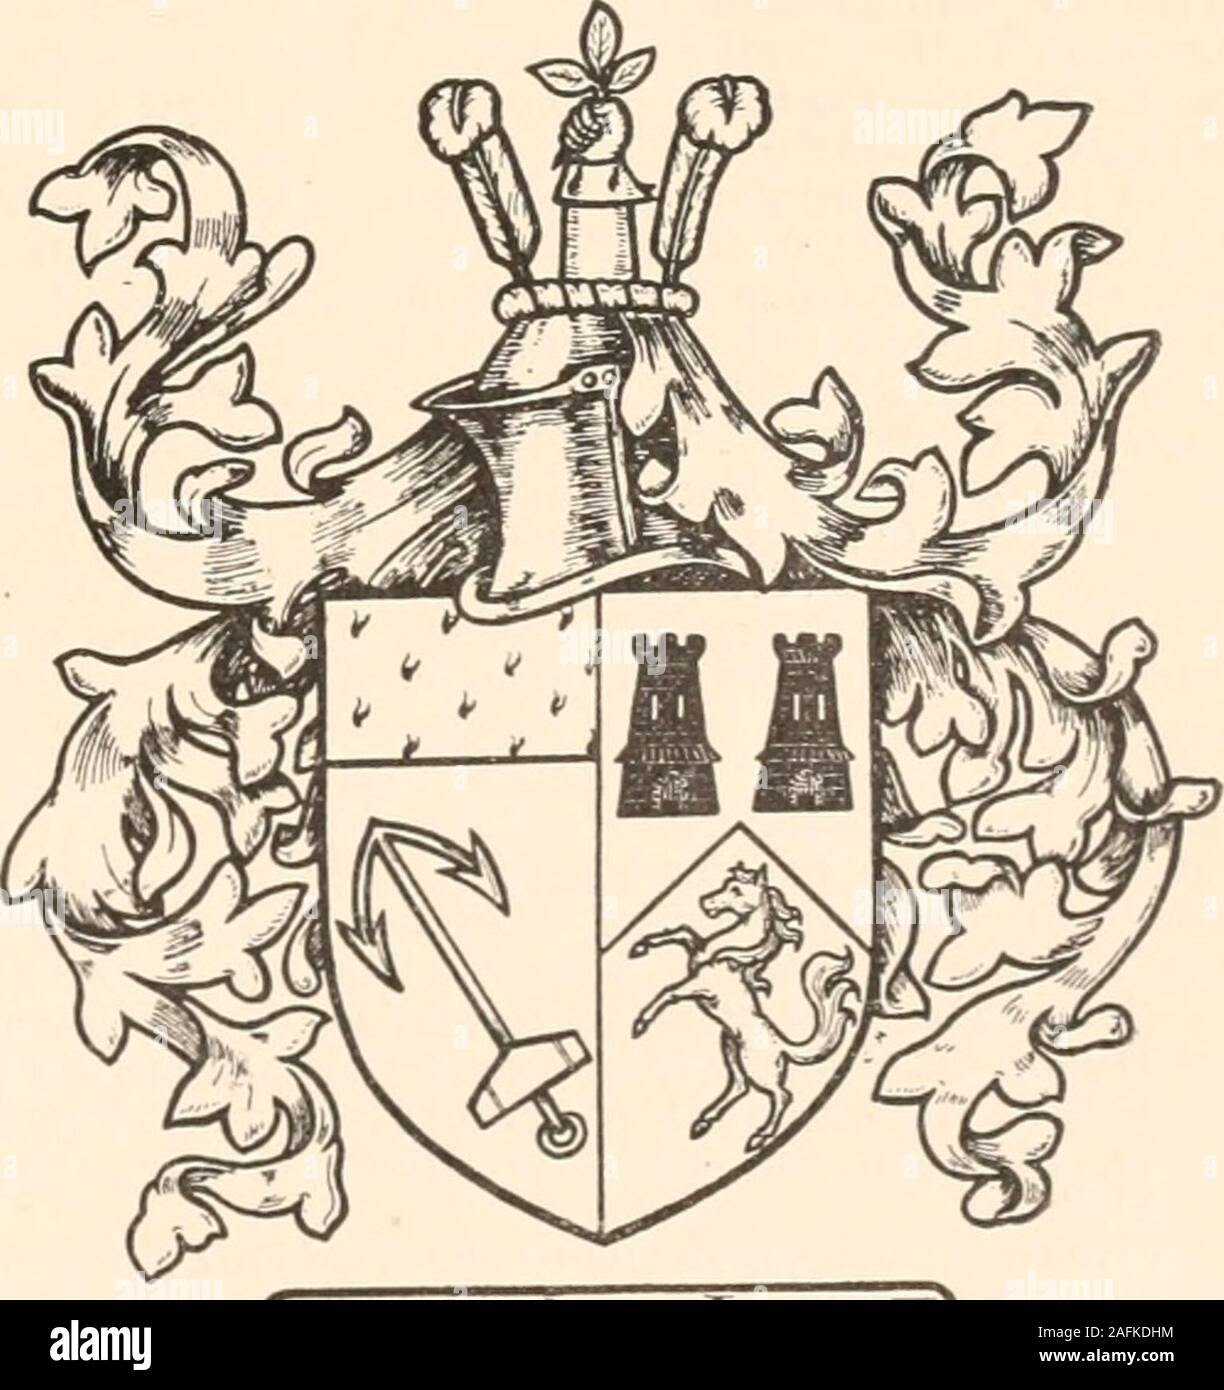 . Armorial families : a directory of gentlemen of coat-armour. d. 1913; m. ist, 1857, Emily Craven [d. 1866), eld. d. of William Barton Gibbons, J. P. ; 2nd, 1867, Blanche St. John, d. of Francis Adolphus Moschzisker, Doctor of Philosophy :— Carlyon Wilfroy Bellairs, Esq., Commr. R.N. (ret.), M.P. for Kings Lynn 1906-10, for Maidstone Borough 1915-18, and for Maidstone Div. of Kent, since 1918, b. 1871 ; 7)1. 1911, Charlotte, d. of Col. H. L. Pearson of Laurence of Long Island, U.S.A. Res.—35 Wilton Place, S.W. Club—(Zz.x.on. Roger Mowbray Bellairs, Esq., Capt. R.N., C.M.G.,Legion of Honour, Stock Photo